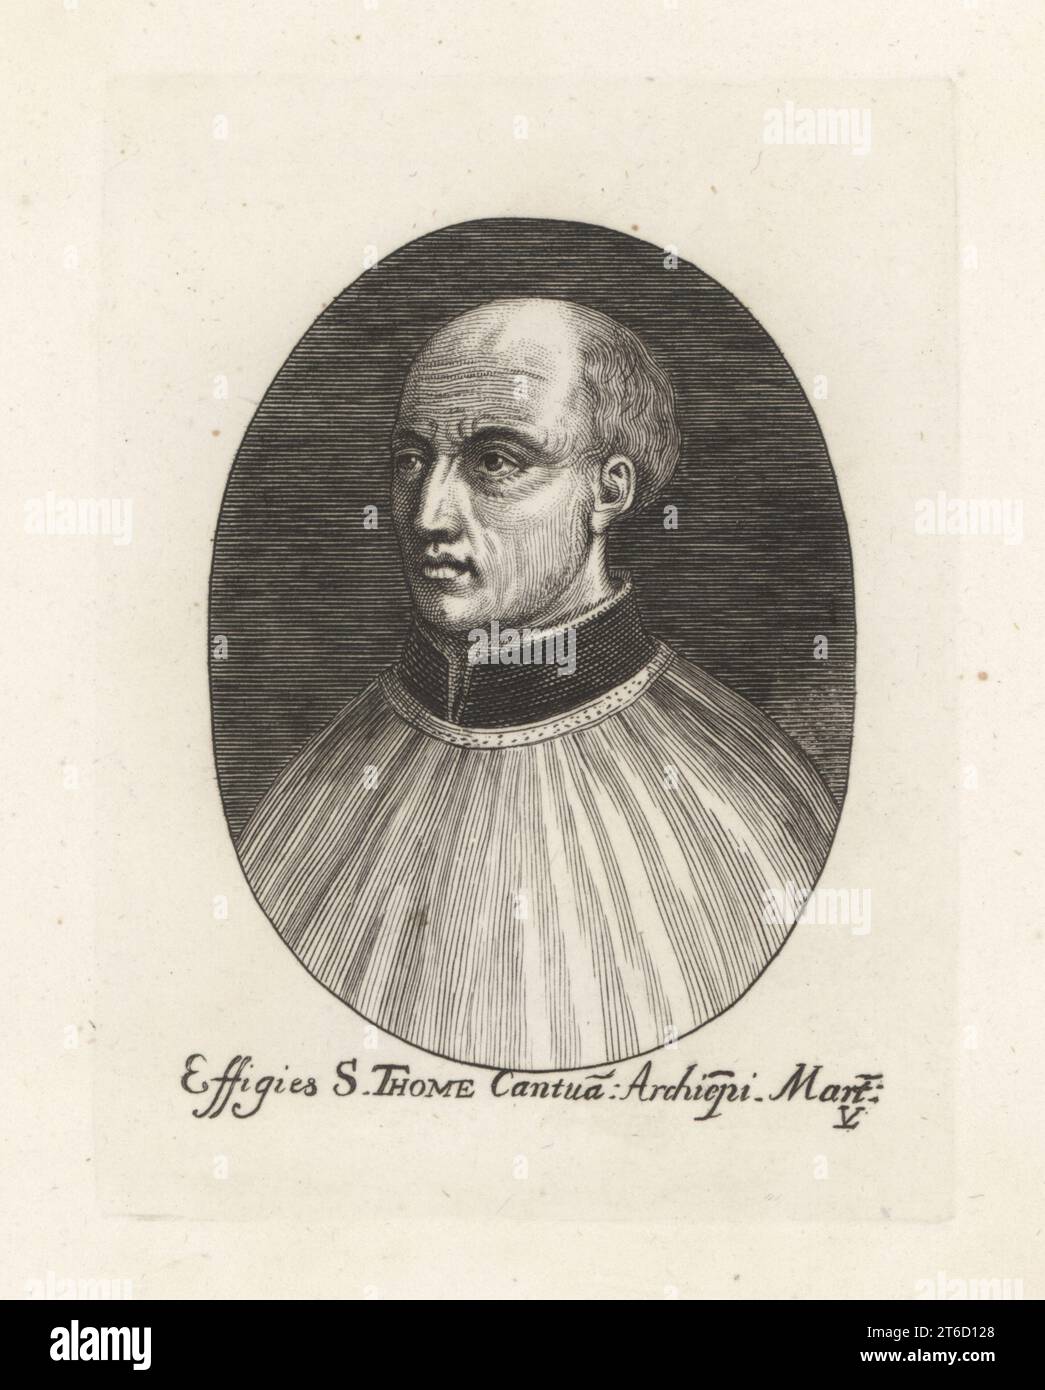 Thomas Becket, Archbishop of Canterbury, c.1119-1170. Bishop murdered by knights of Henry the Young King. Oval portrait in ecclesiastical robes. Effigies S. Thome Cantua Archiepi Mart. Copperplate engraving after John Vosterman from Samuel Woodburns Gallery of Rare Portraits Consisting of Original Plates, George Jones, 102 St Martins Lane, London, 1816. Stock Photo